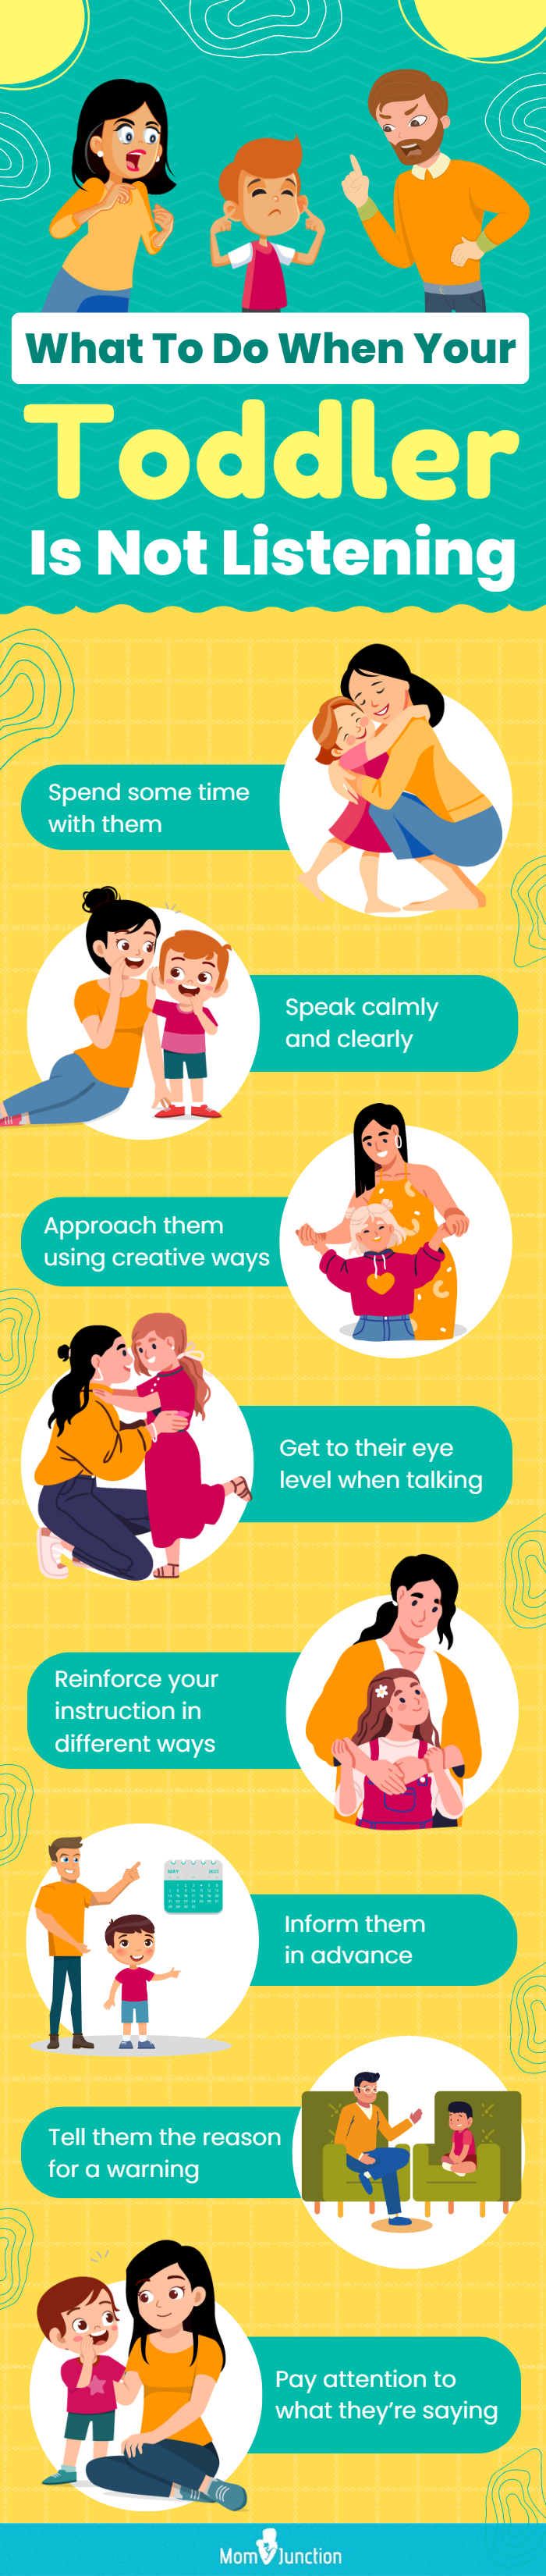 what to do when your toddler is not listening (infographic)